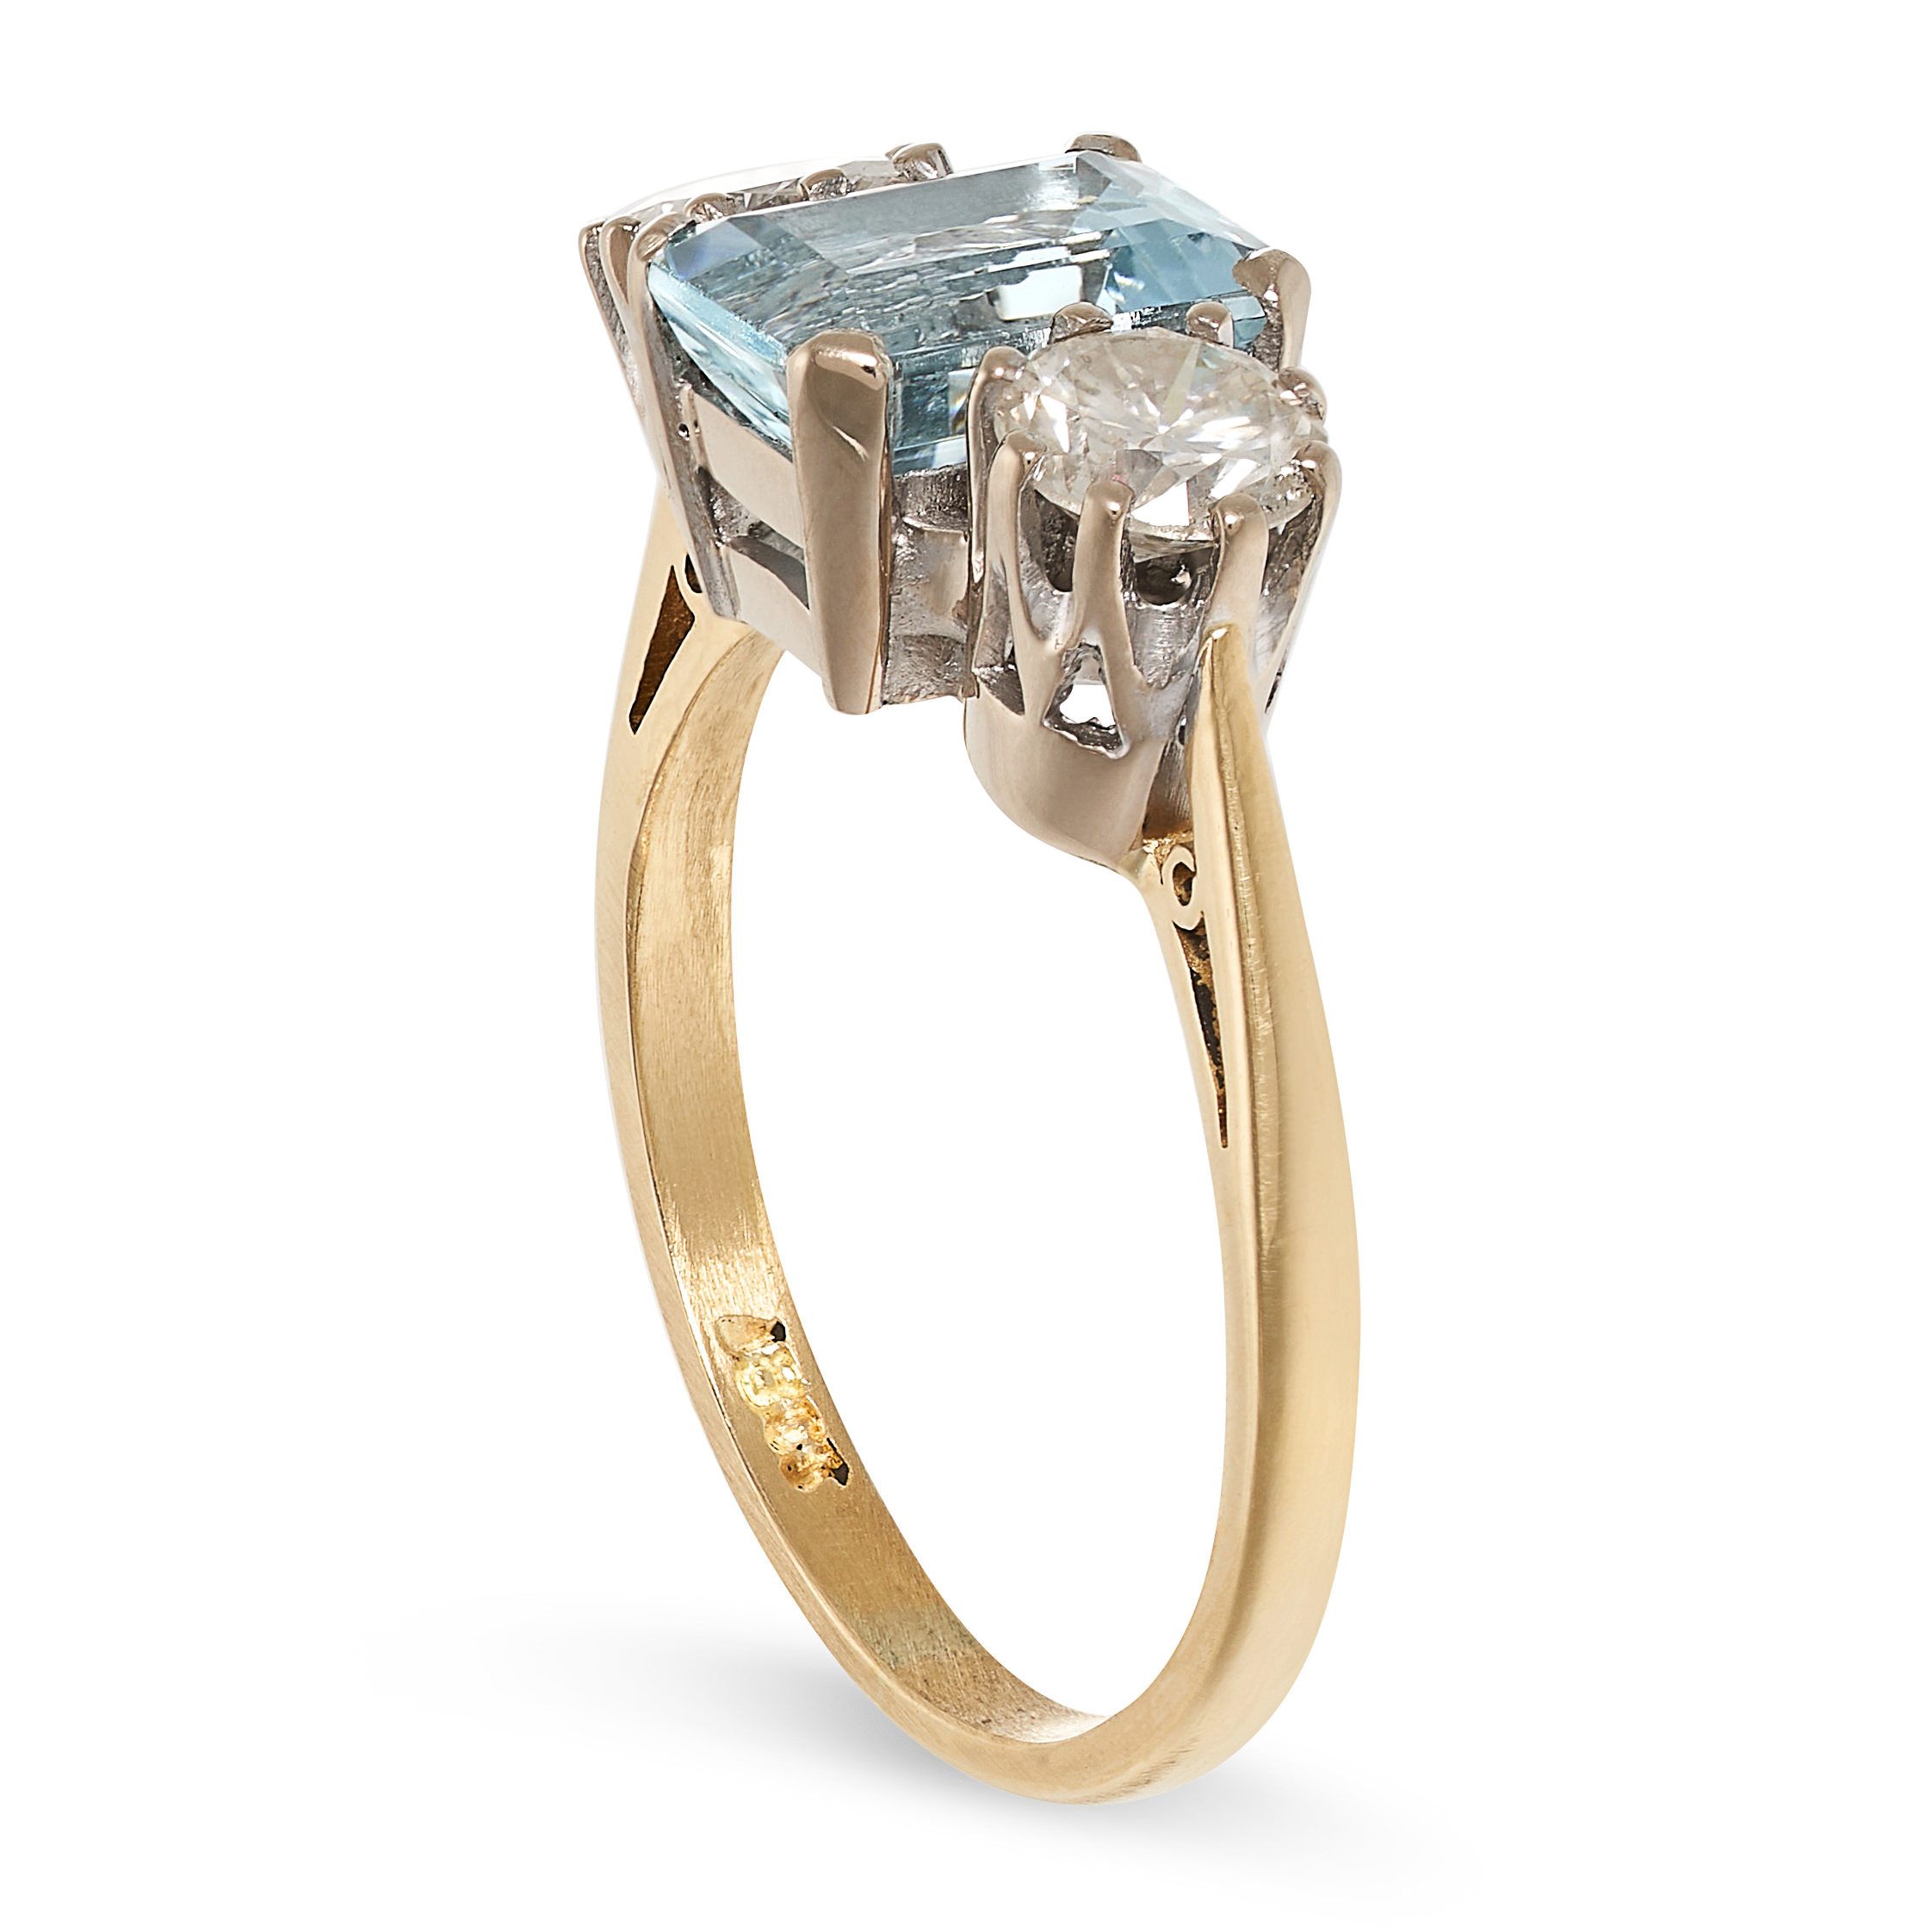 AN AQUAMARINE AND DIAMOND RING in 18ct gold, set with an emerald cut aquamarine of 1.69 carats - Image 2 of 2